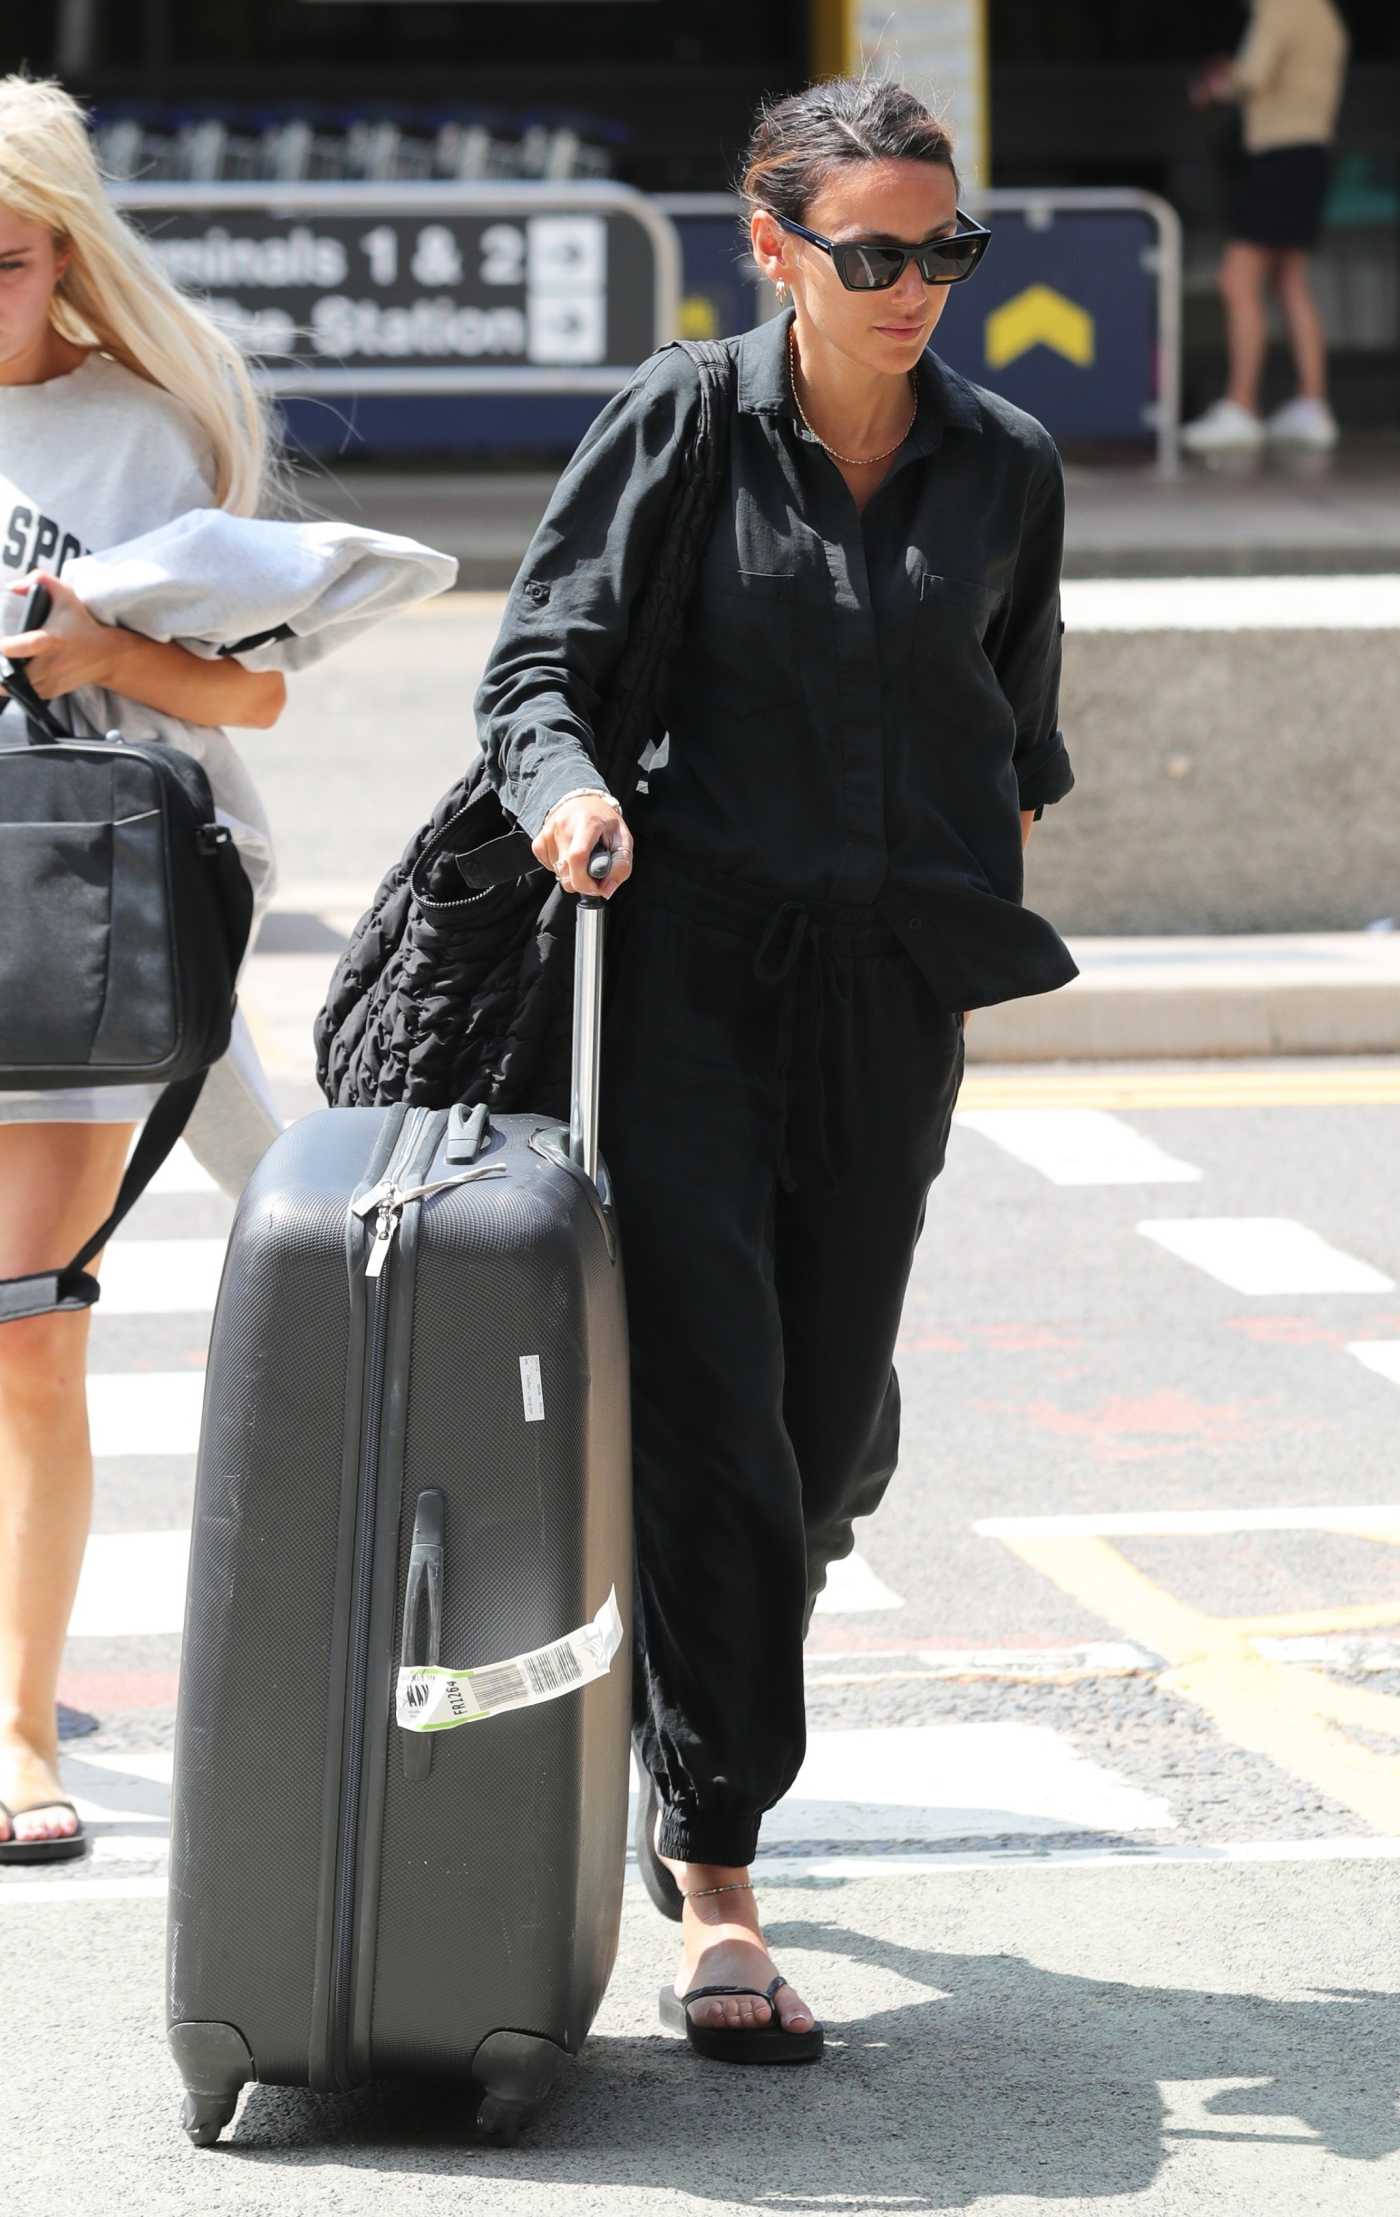 Michelle Keegan in a Black Shirt Arrives at Airport in Manchester 06/24/2023